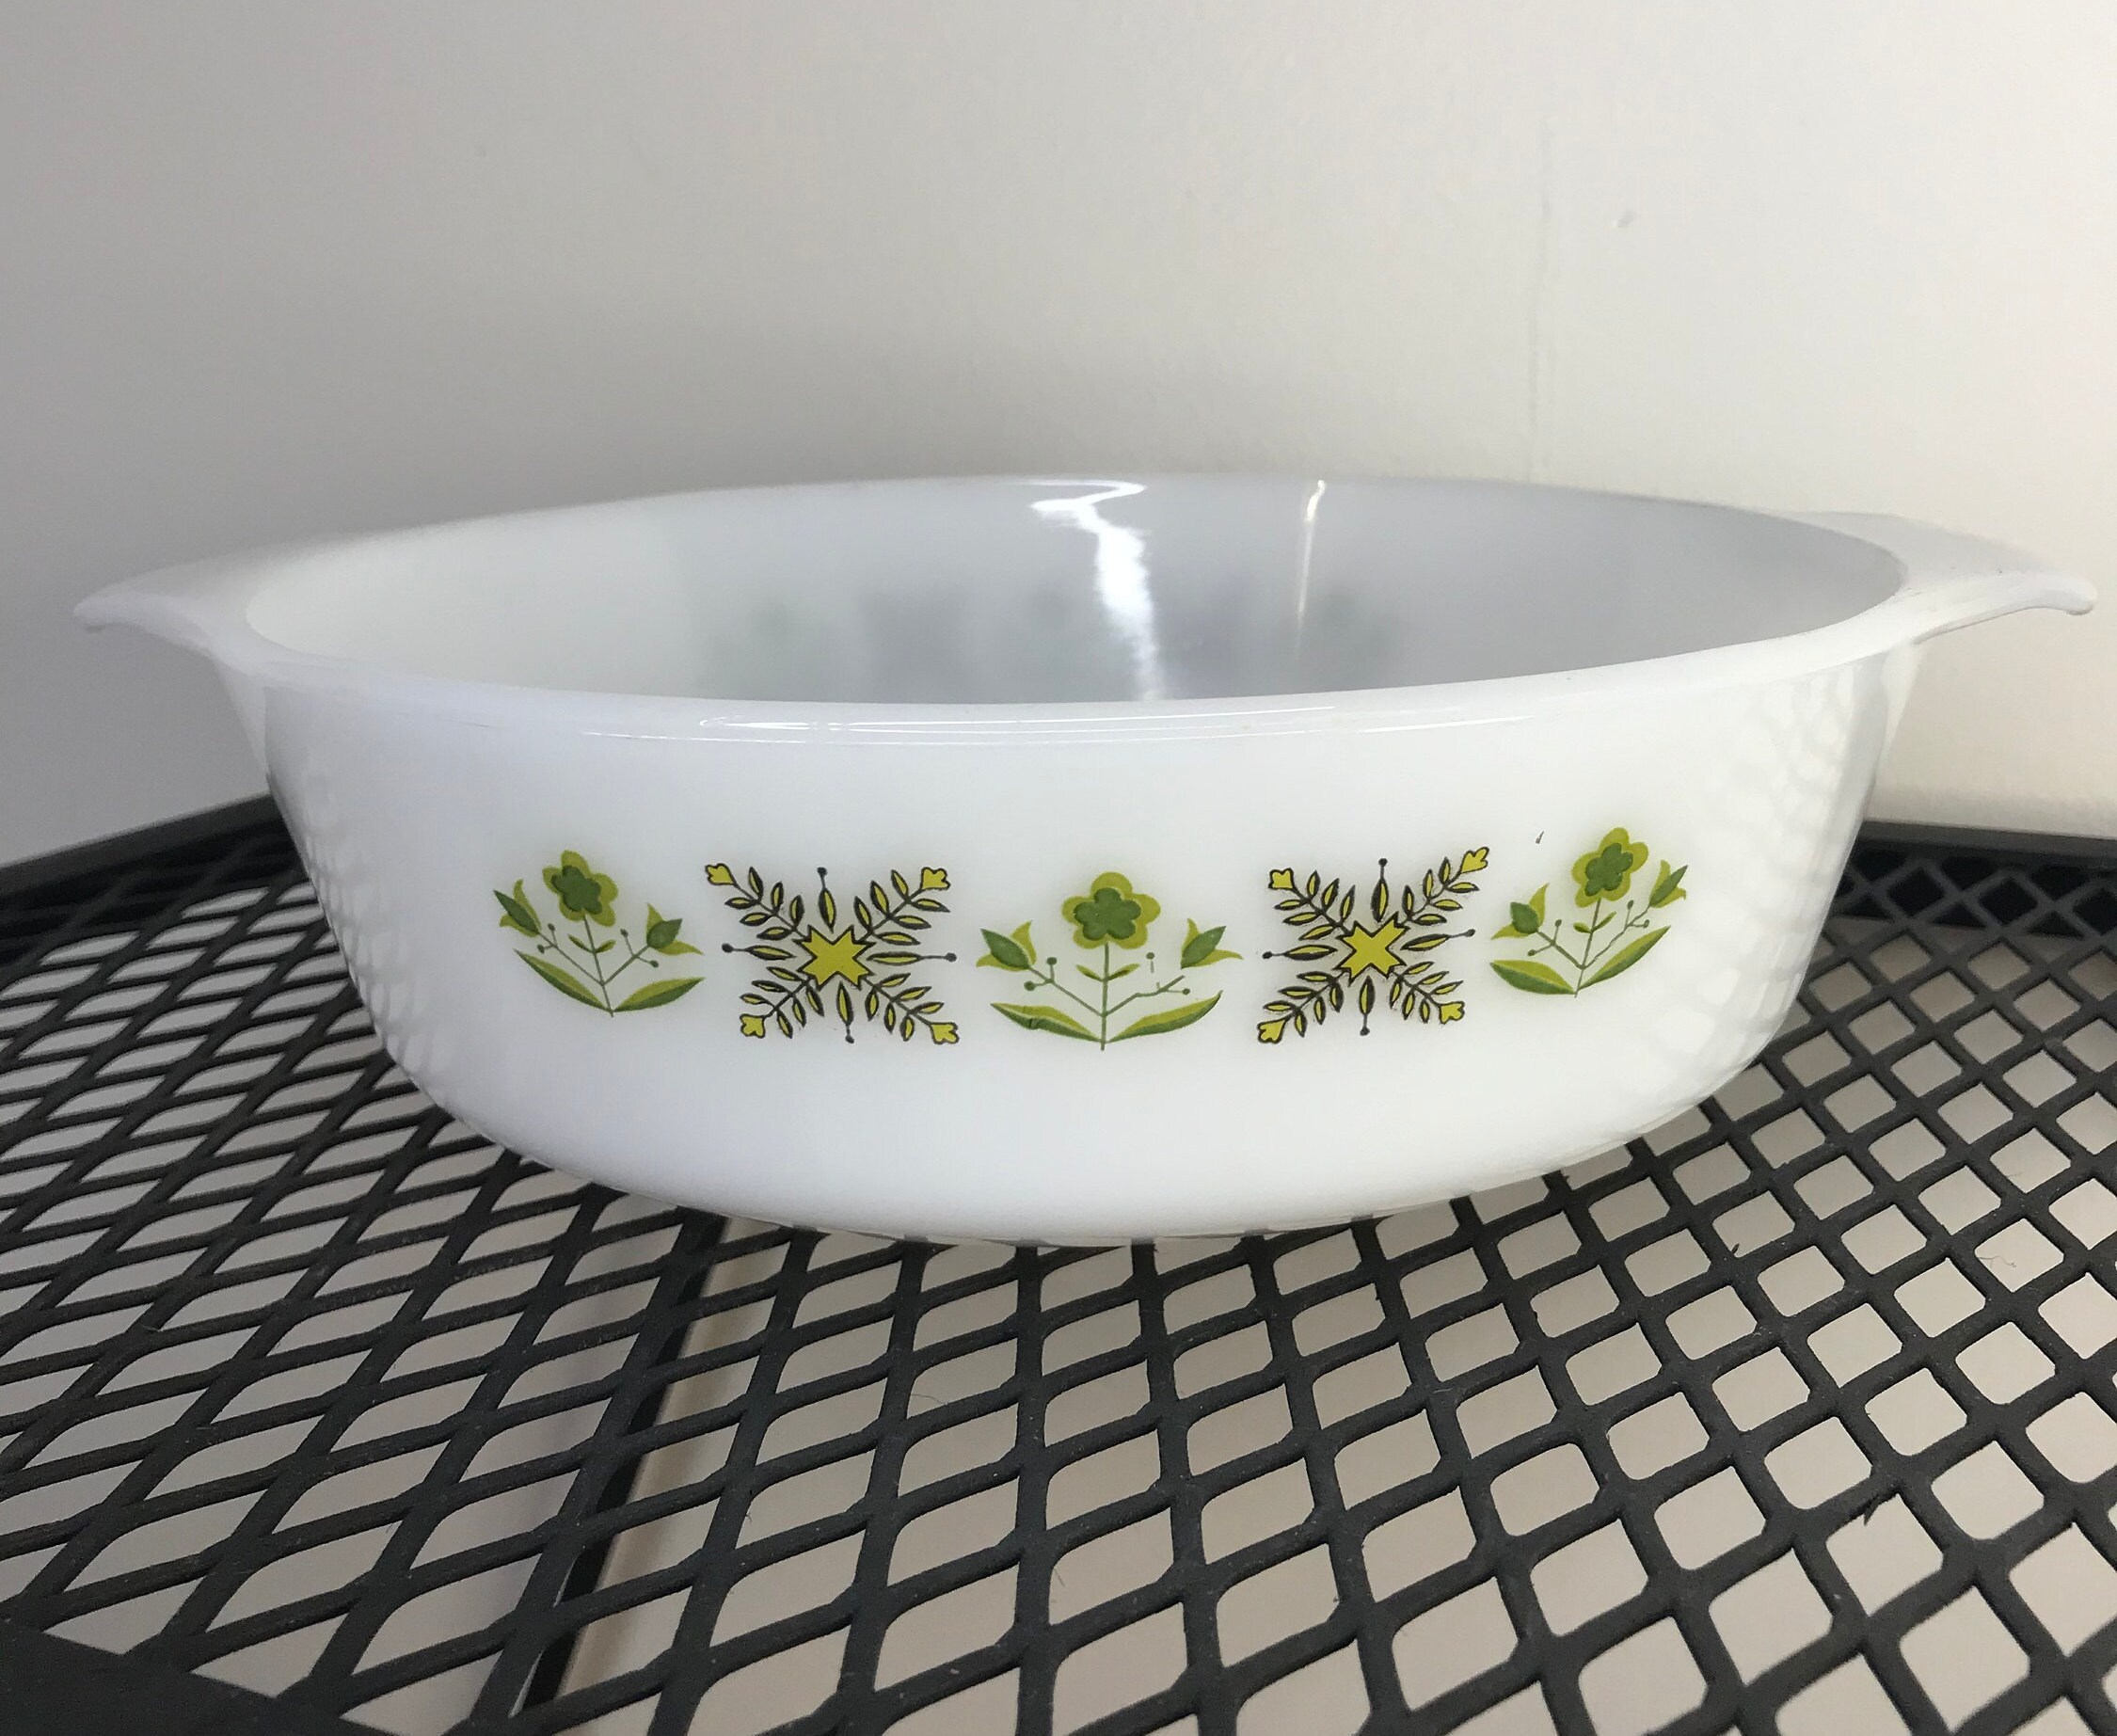 Vintage Anchor Hocking Glass Fire King Ovenware Meadow Green 2 Qt Casserole.